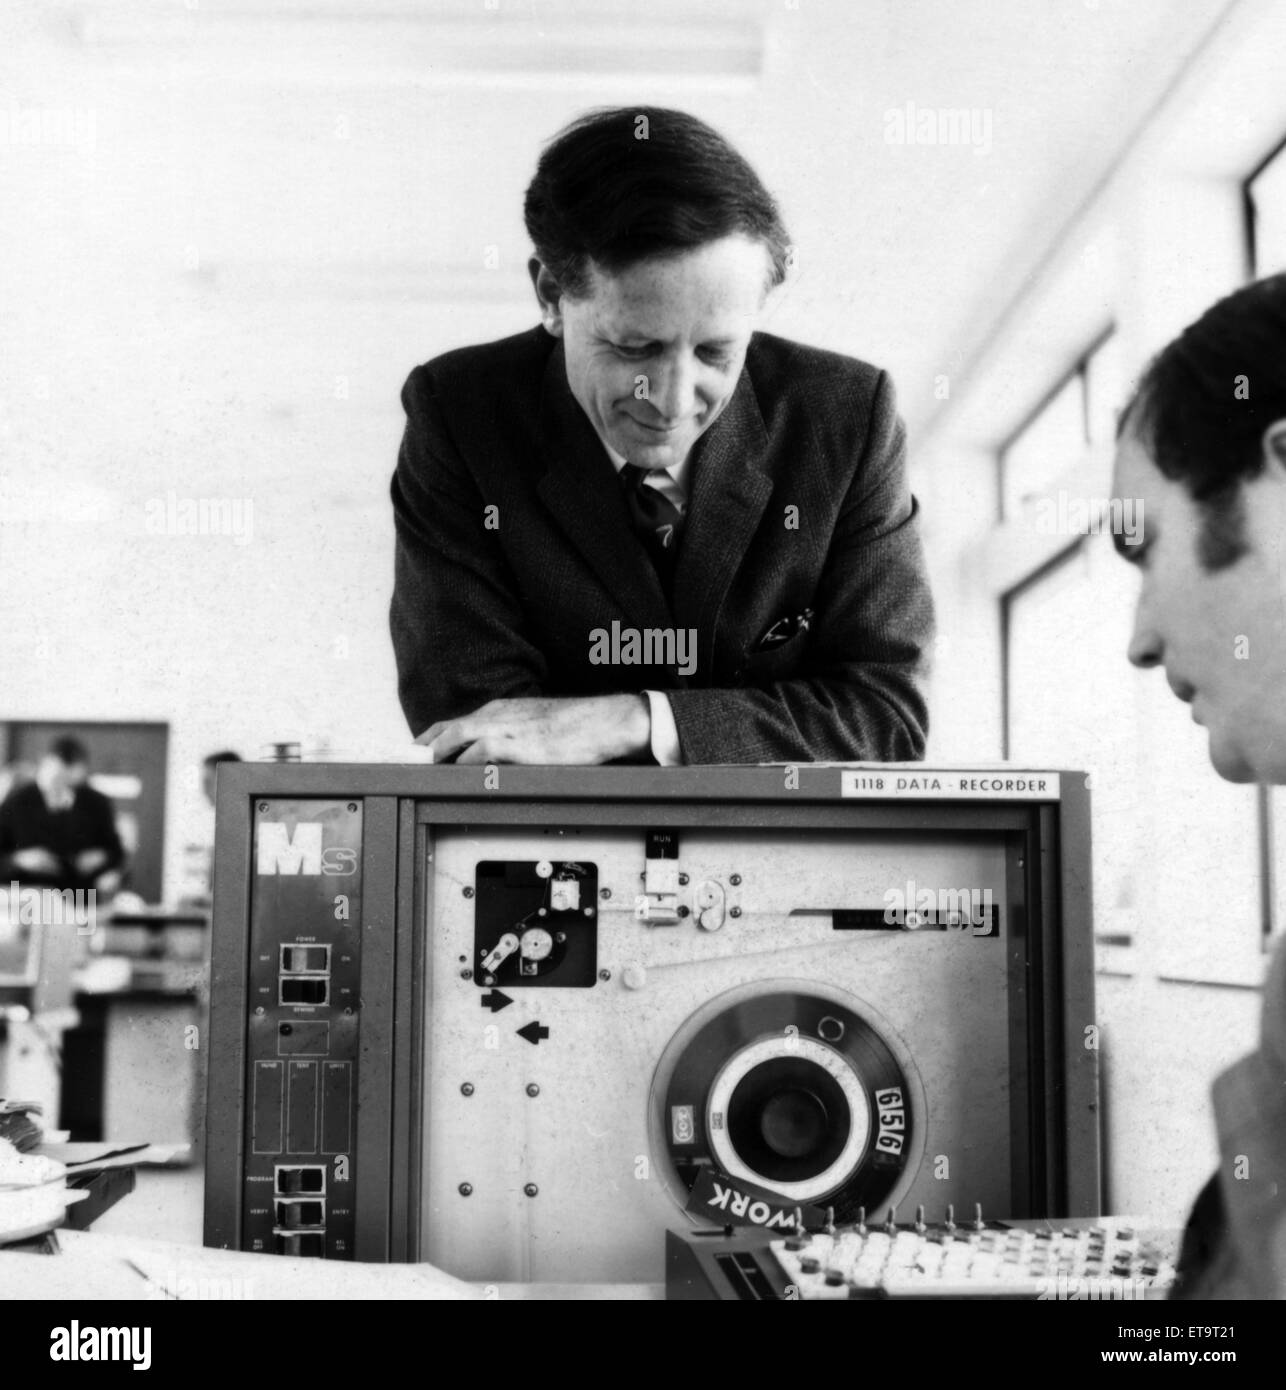 Stan Kelly-Bootle, author, songwriter and known for chieving the first postgraduate diploma in computer science (1954), born 1929, died 16th April 2014. Pictured, computing the mistake spotters entries. 1st August 1969. Stock Photo